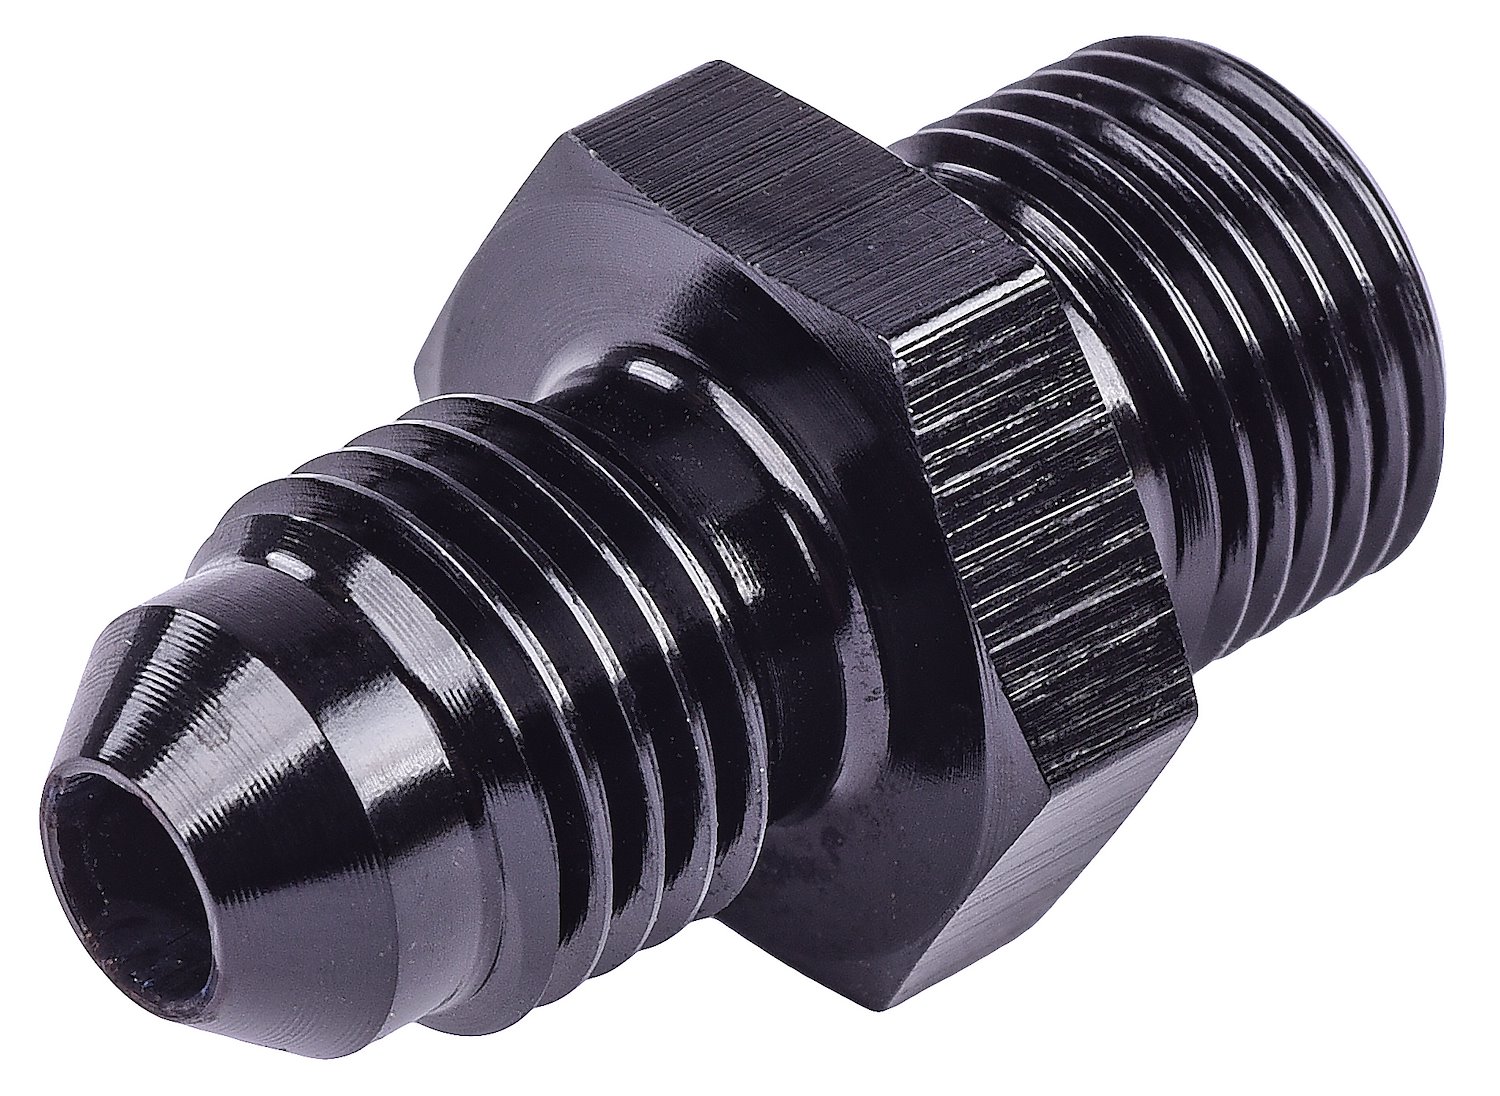 AN to Metric Adapter Fitting [-4 AN Male to 12mm x 1.0 Male, Black]